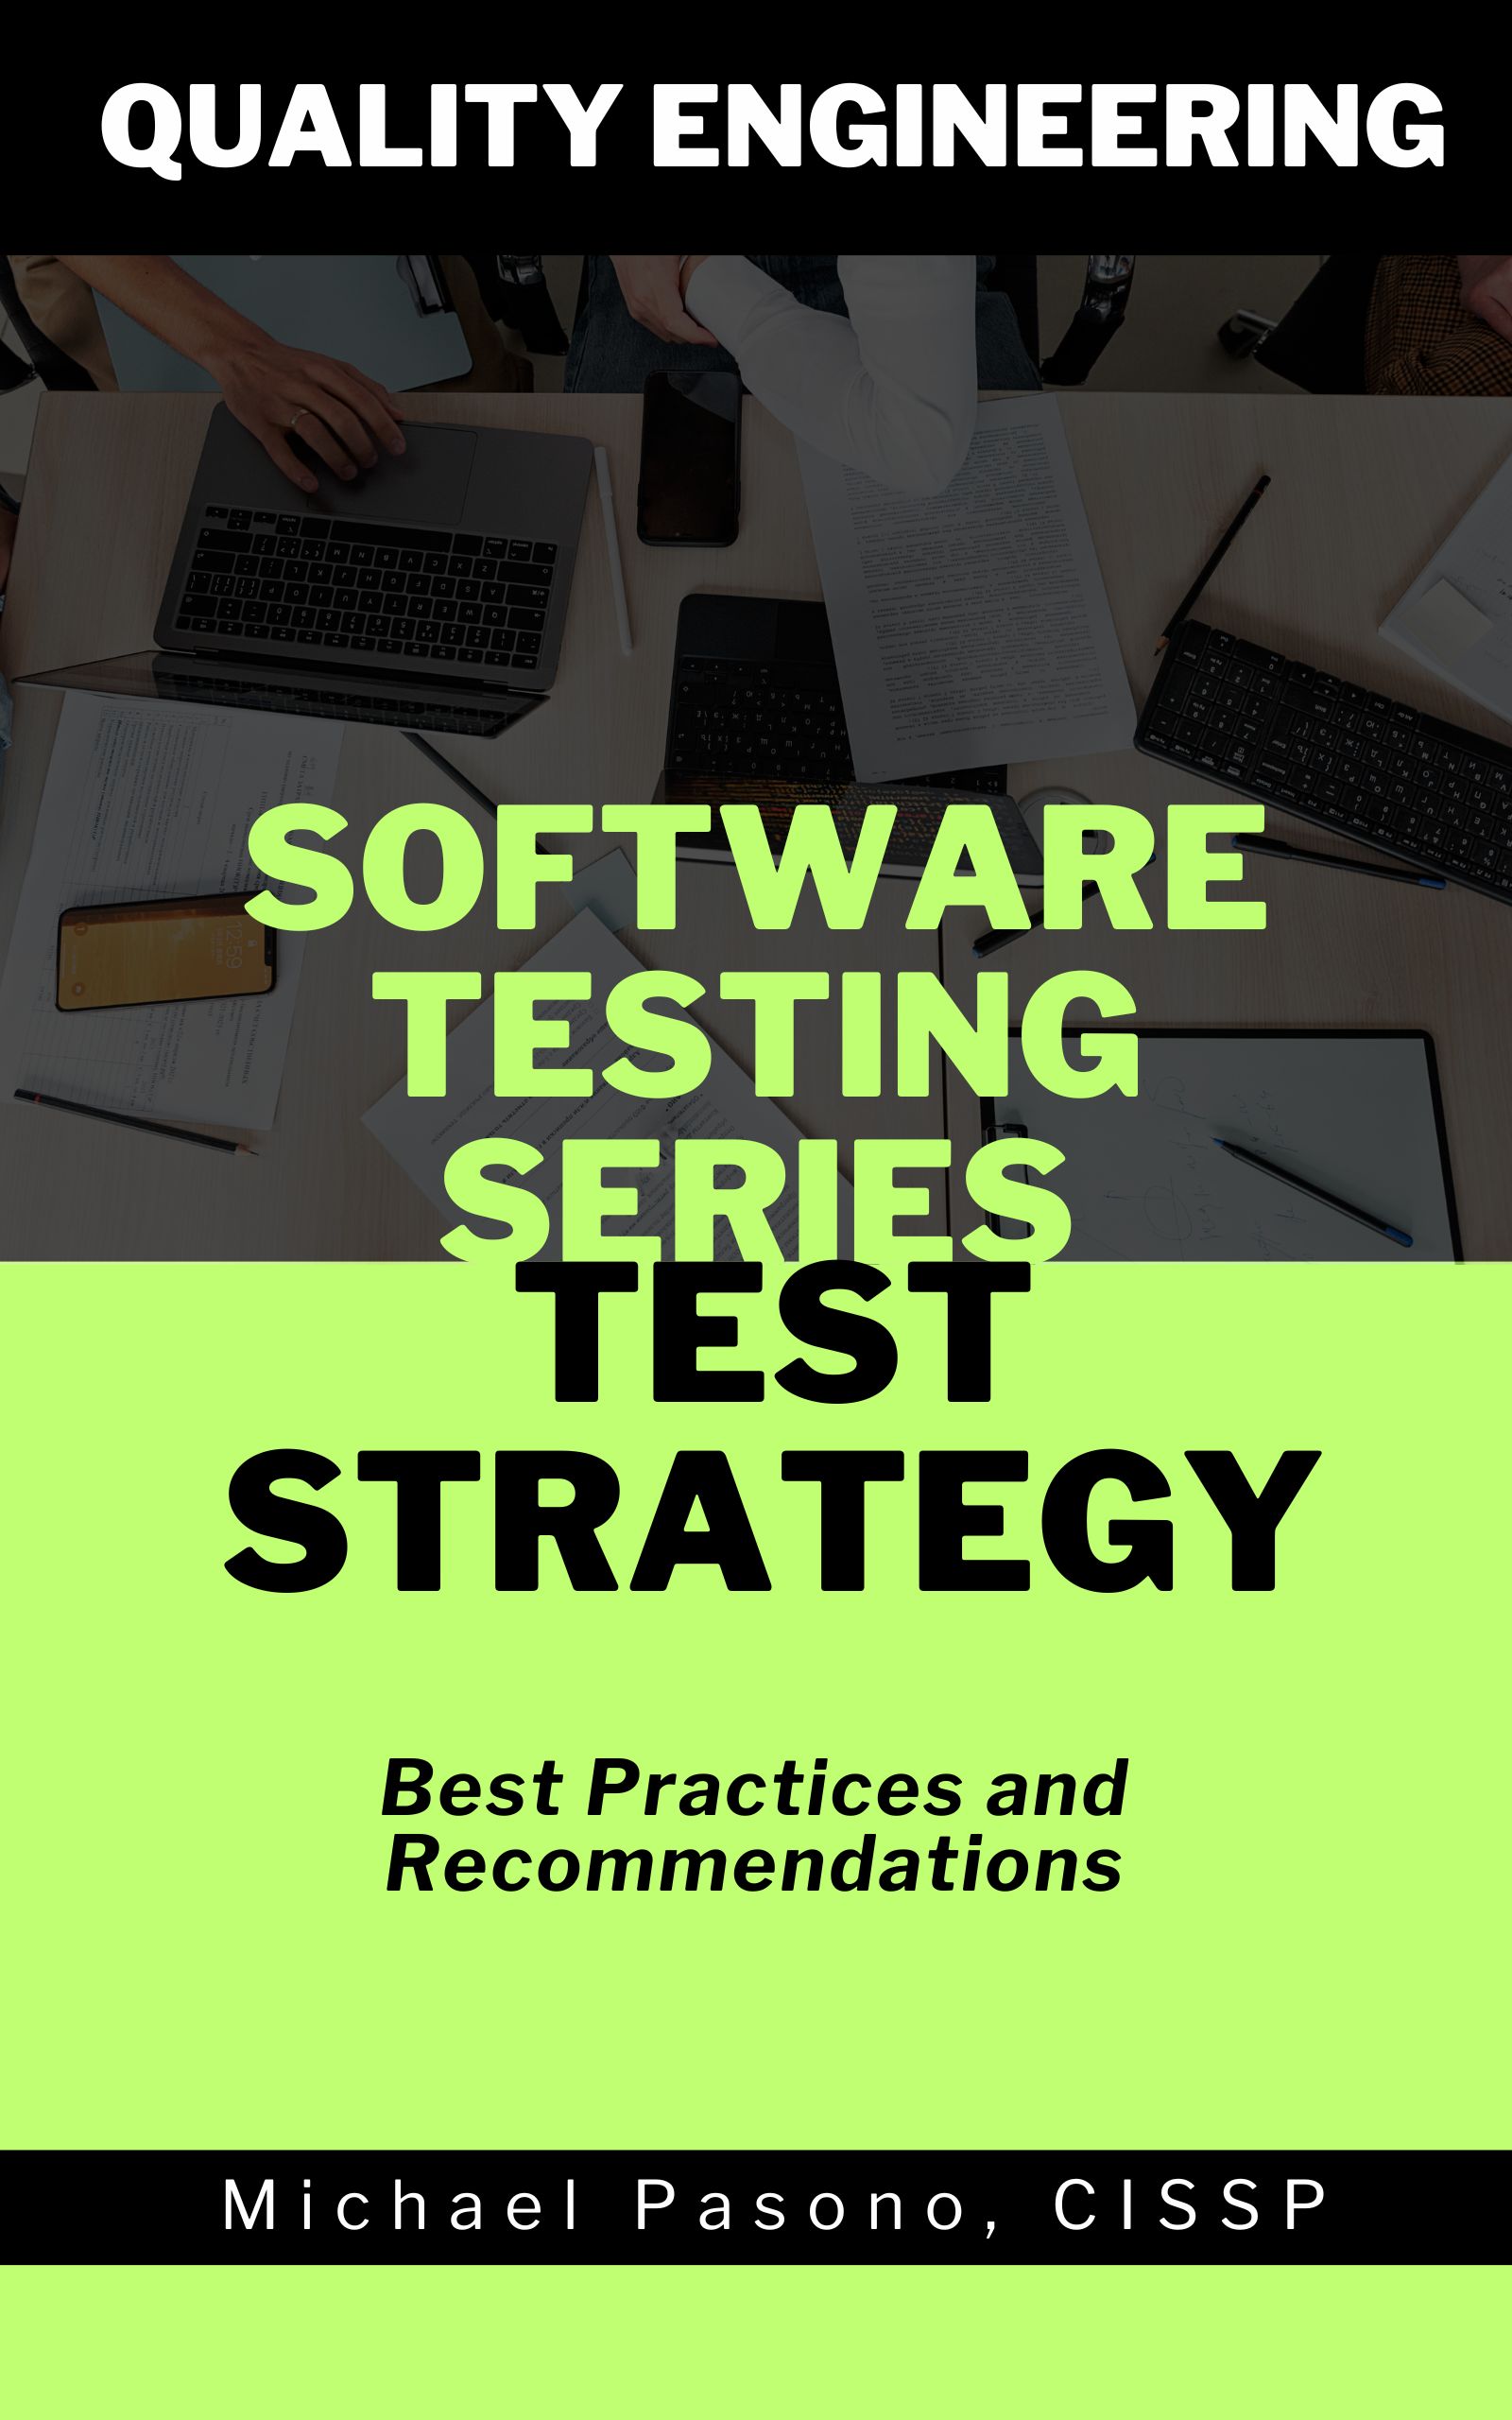 Software Testing Series - Test Strategy